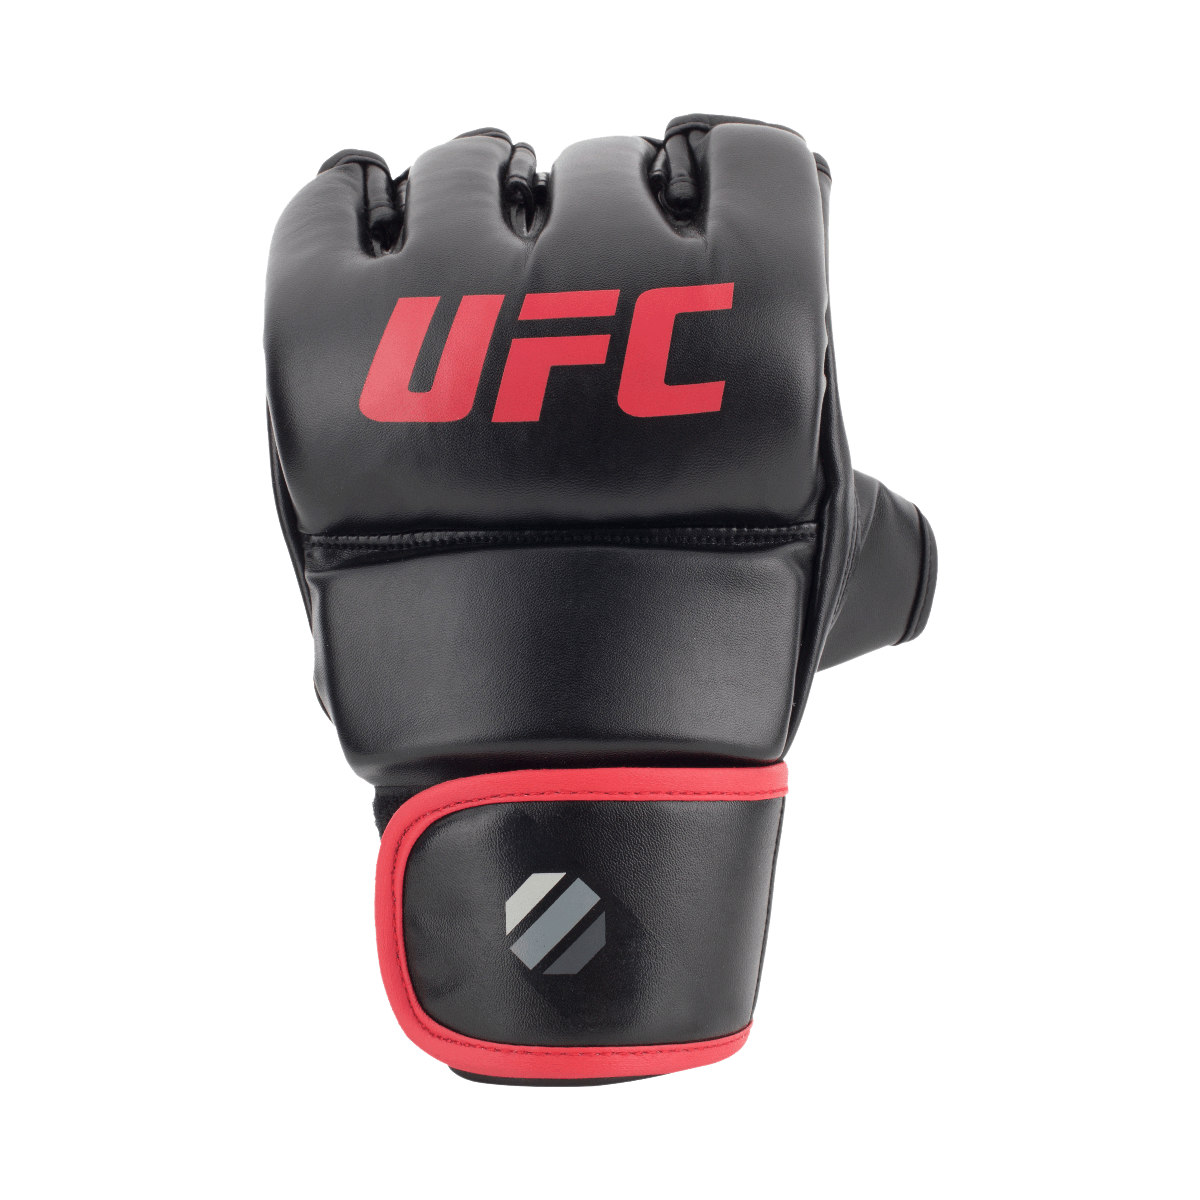 UFC MMA 6oz Fitness Gloves - UFC Equipment MMA and Boxing Gear Spirit Combat Sports